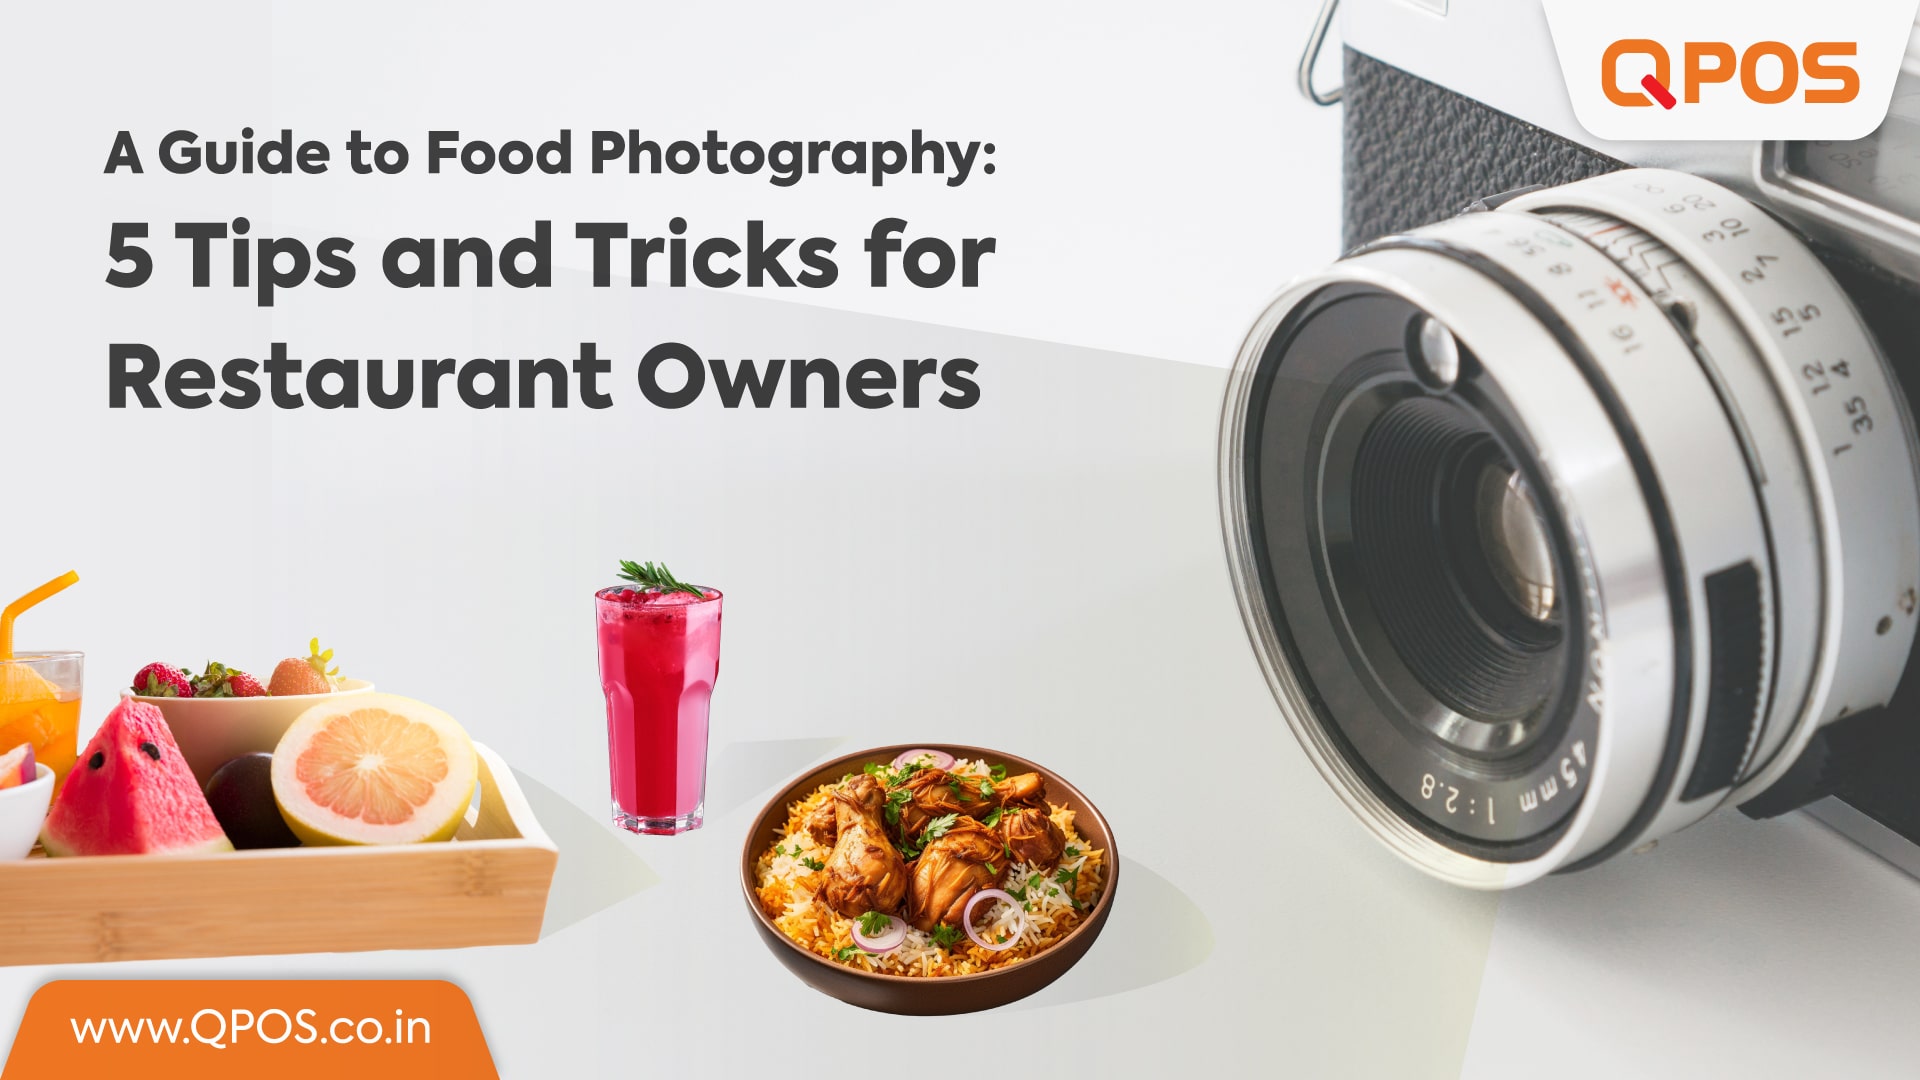 QPOS: A Guide to Food Photography: 5 Tips and Tricks for Restaurant Owners